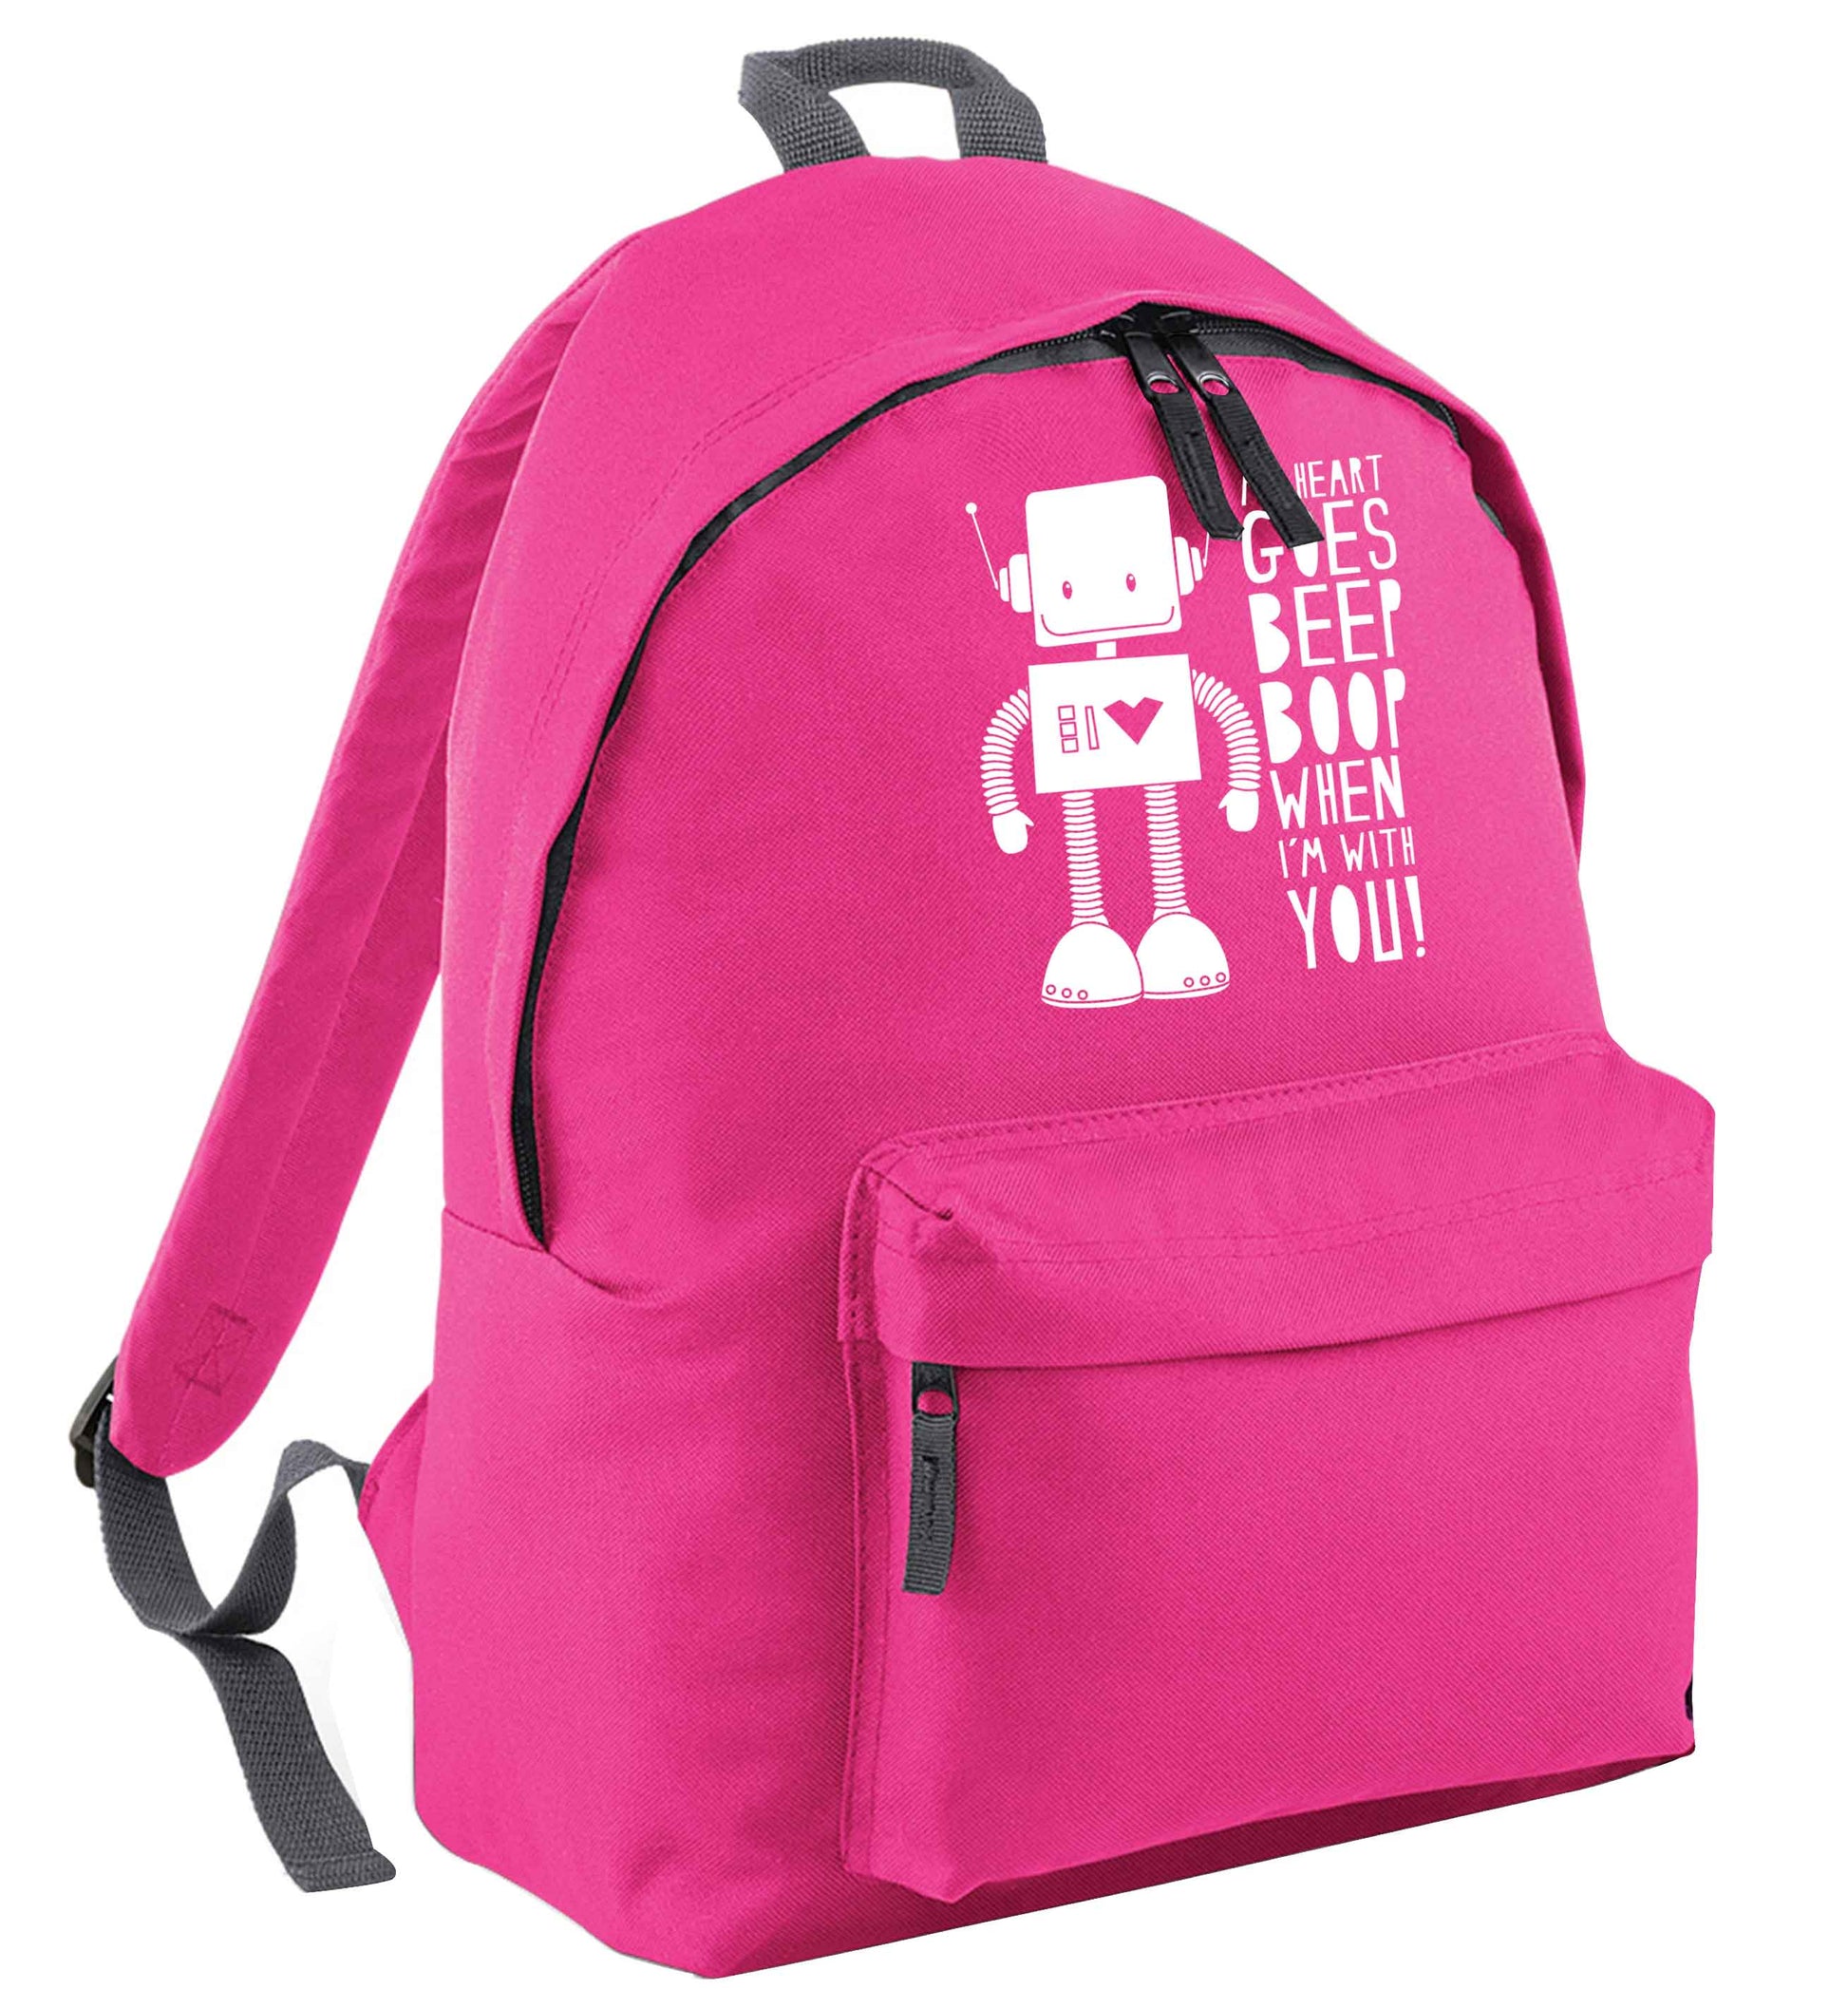 My heart goes beep boop when I'm with you | Children's backpack